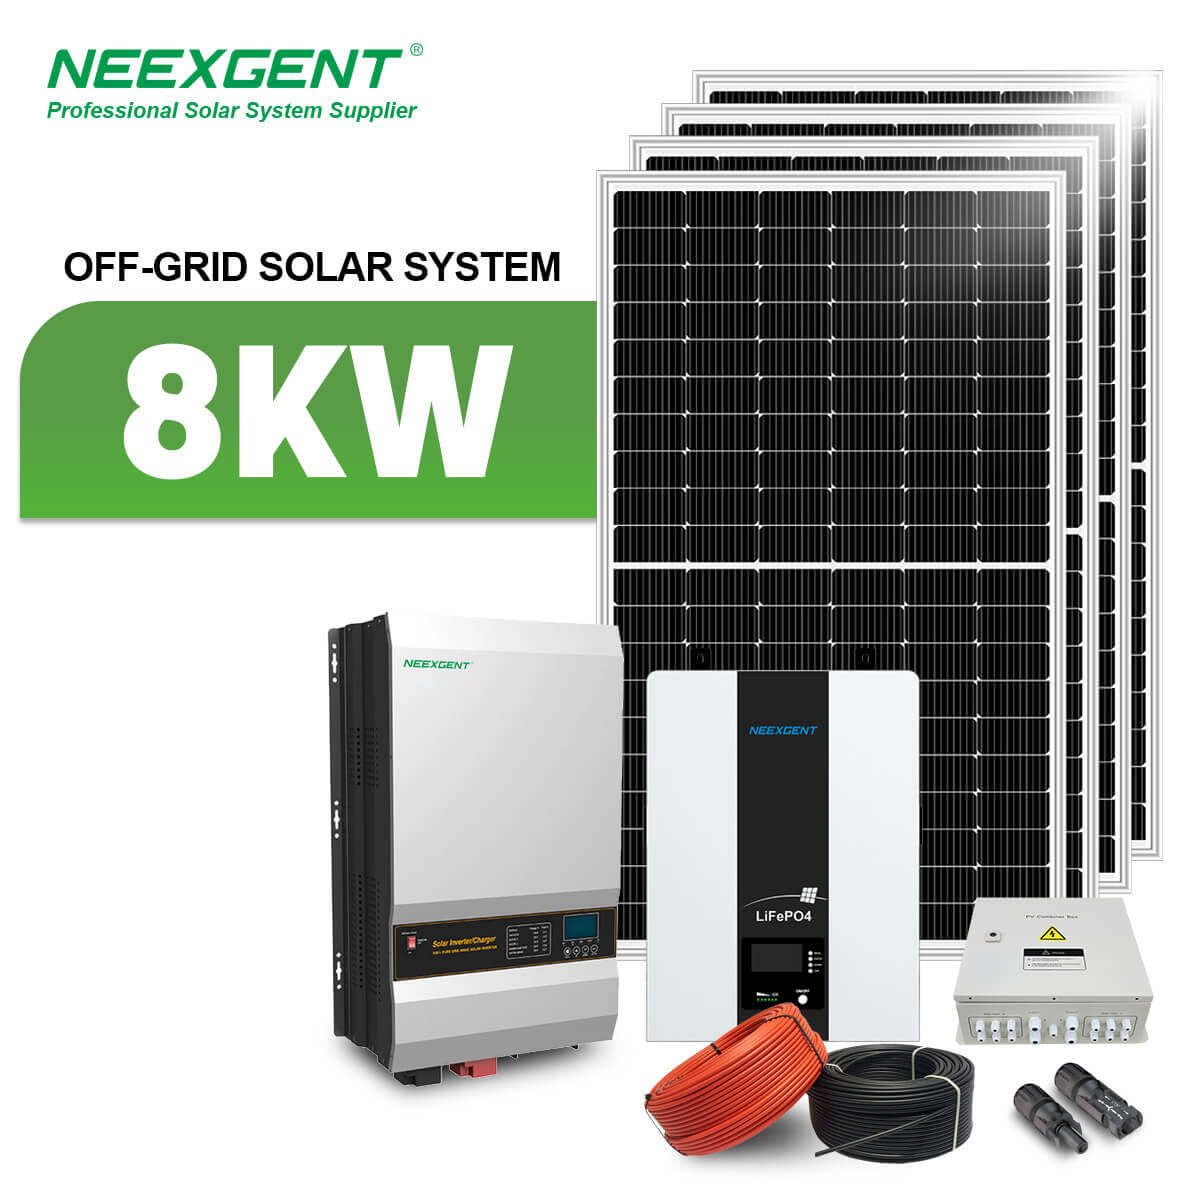 Neexgent Solar Power System 8kw Solar Pv System Kit Off Grid System For Home Use